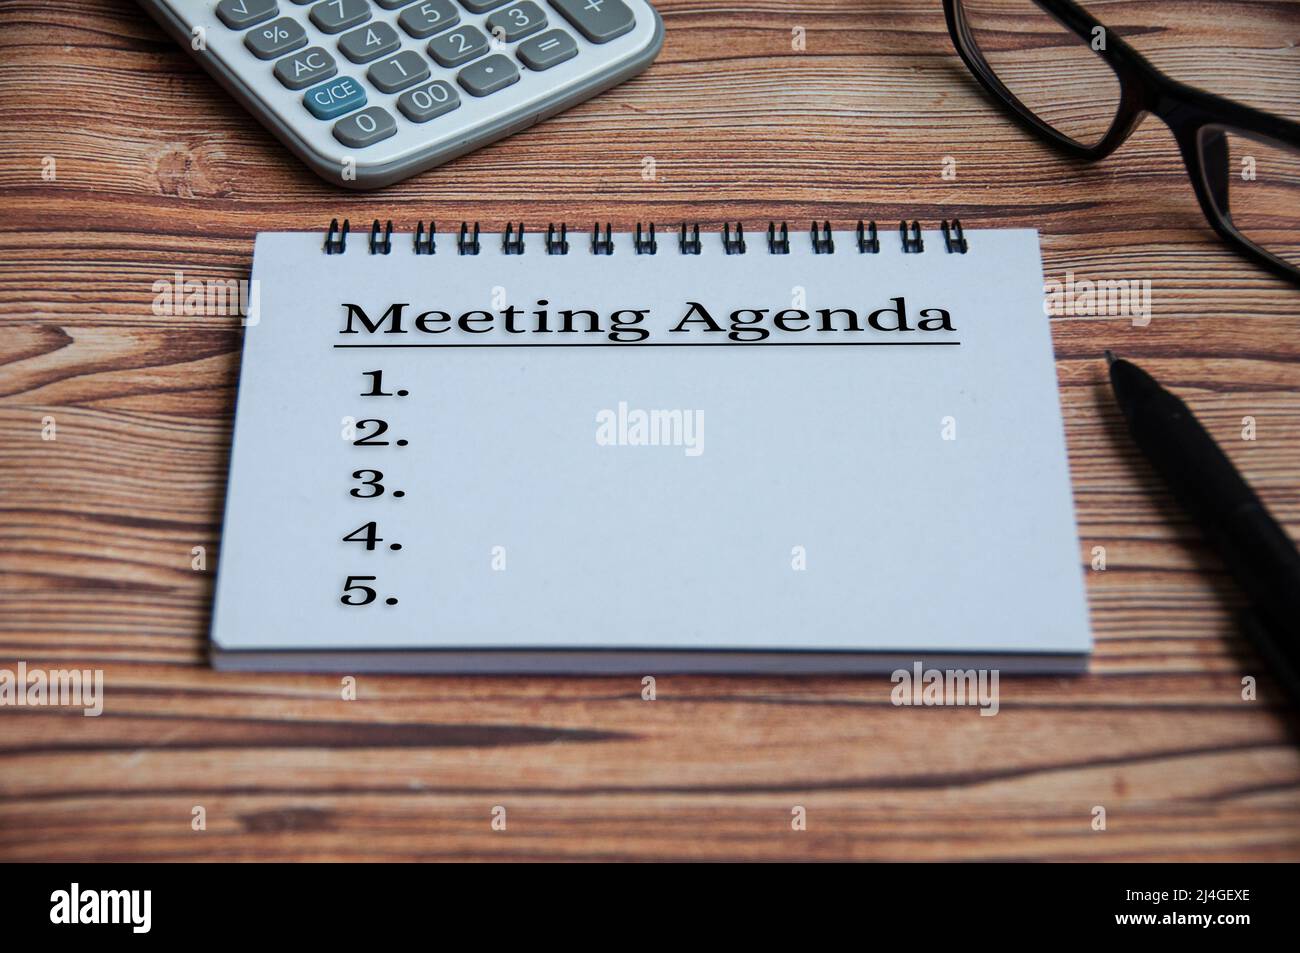 Meeting agenda text on notepad with calculator, pen, glasses and wooden table background. Meeting concept Stock Photo